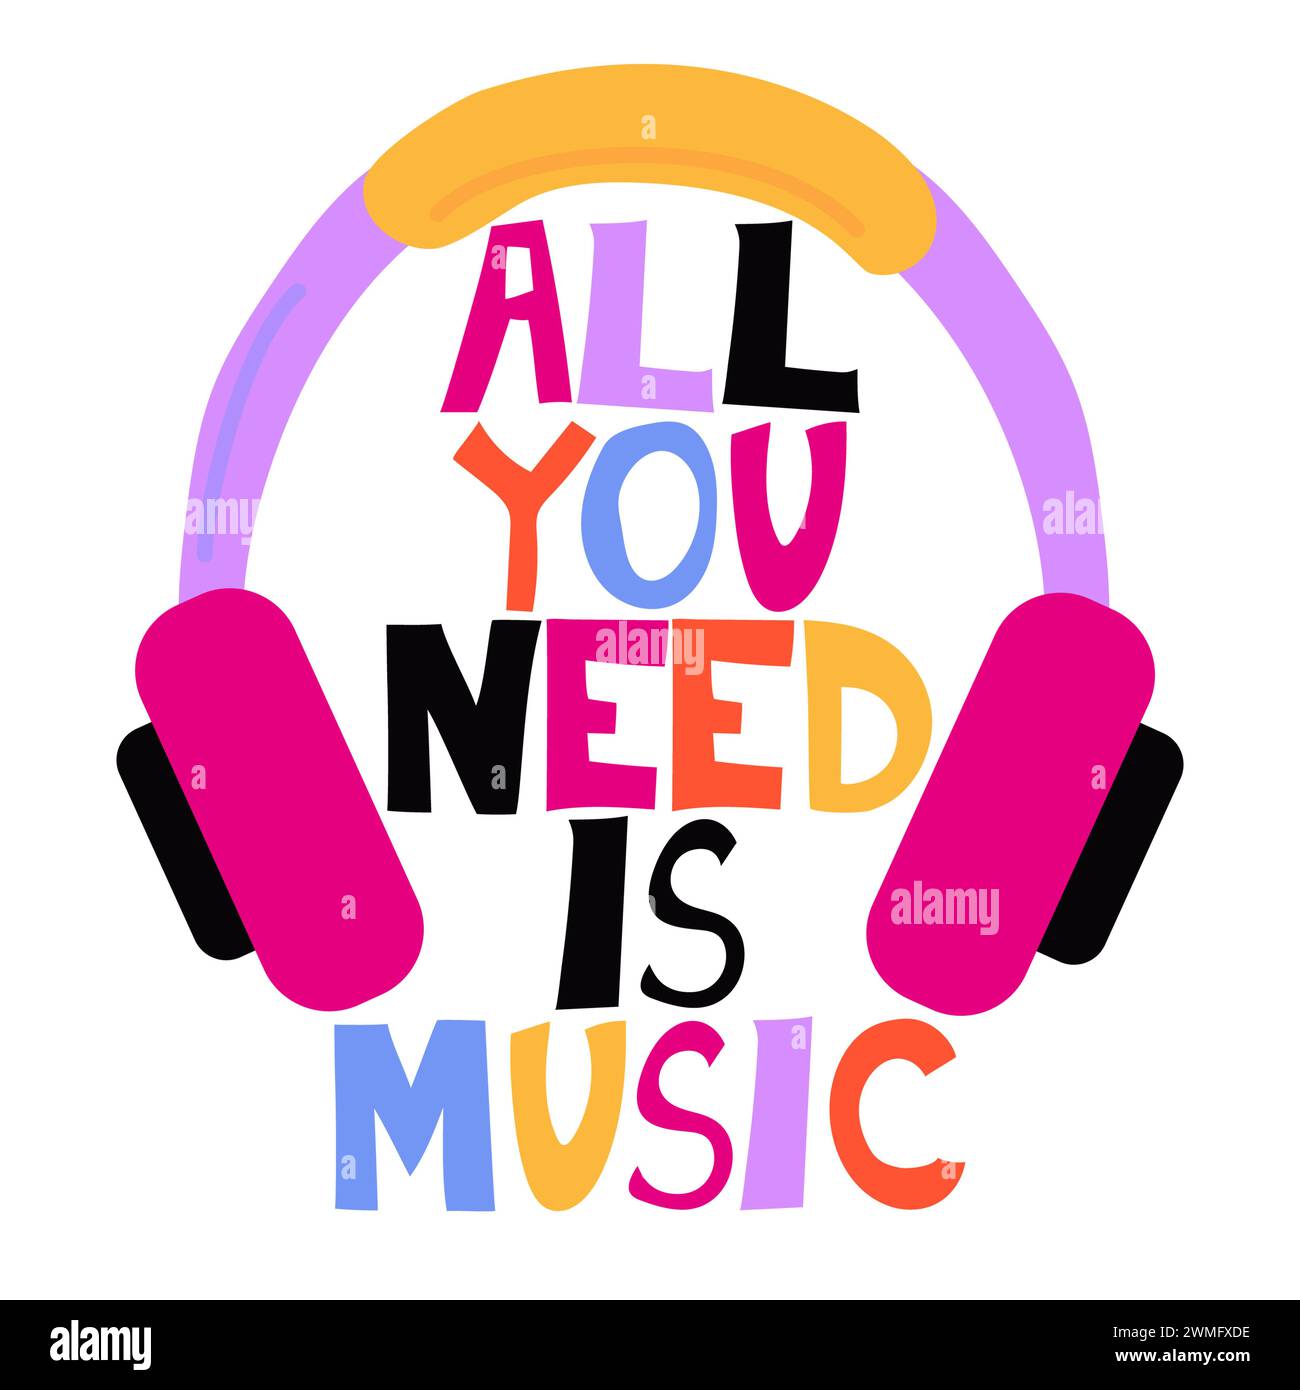 All you need is music. Motivational music on white background. Vector illustration. Stock Photo